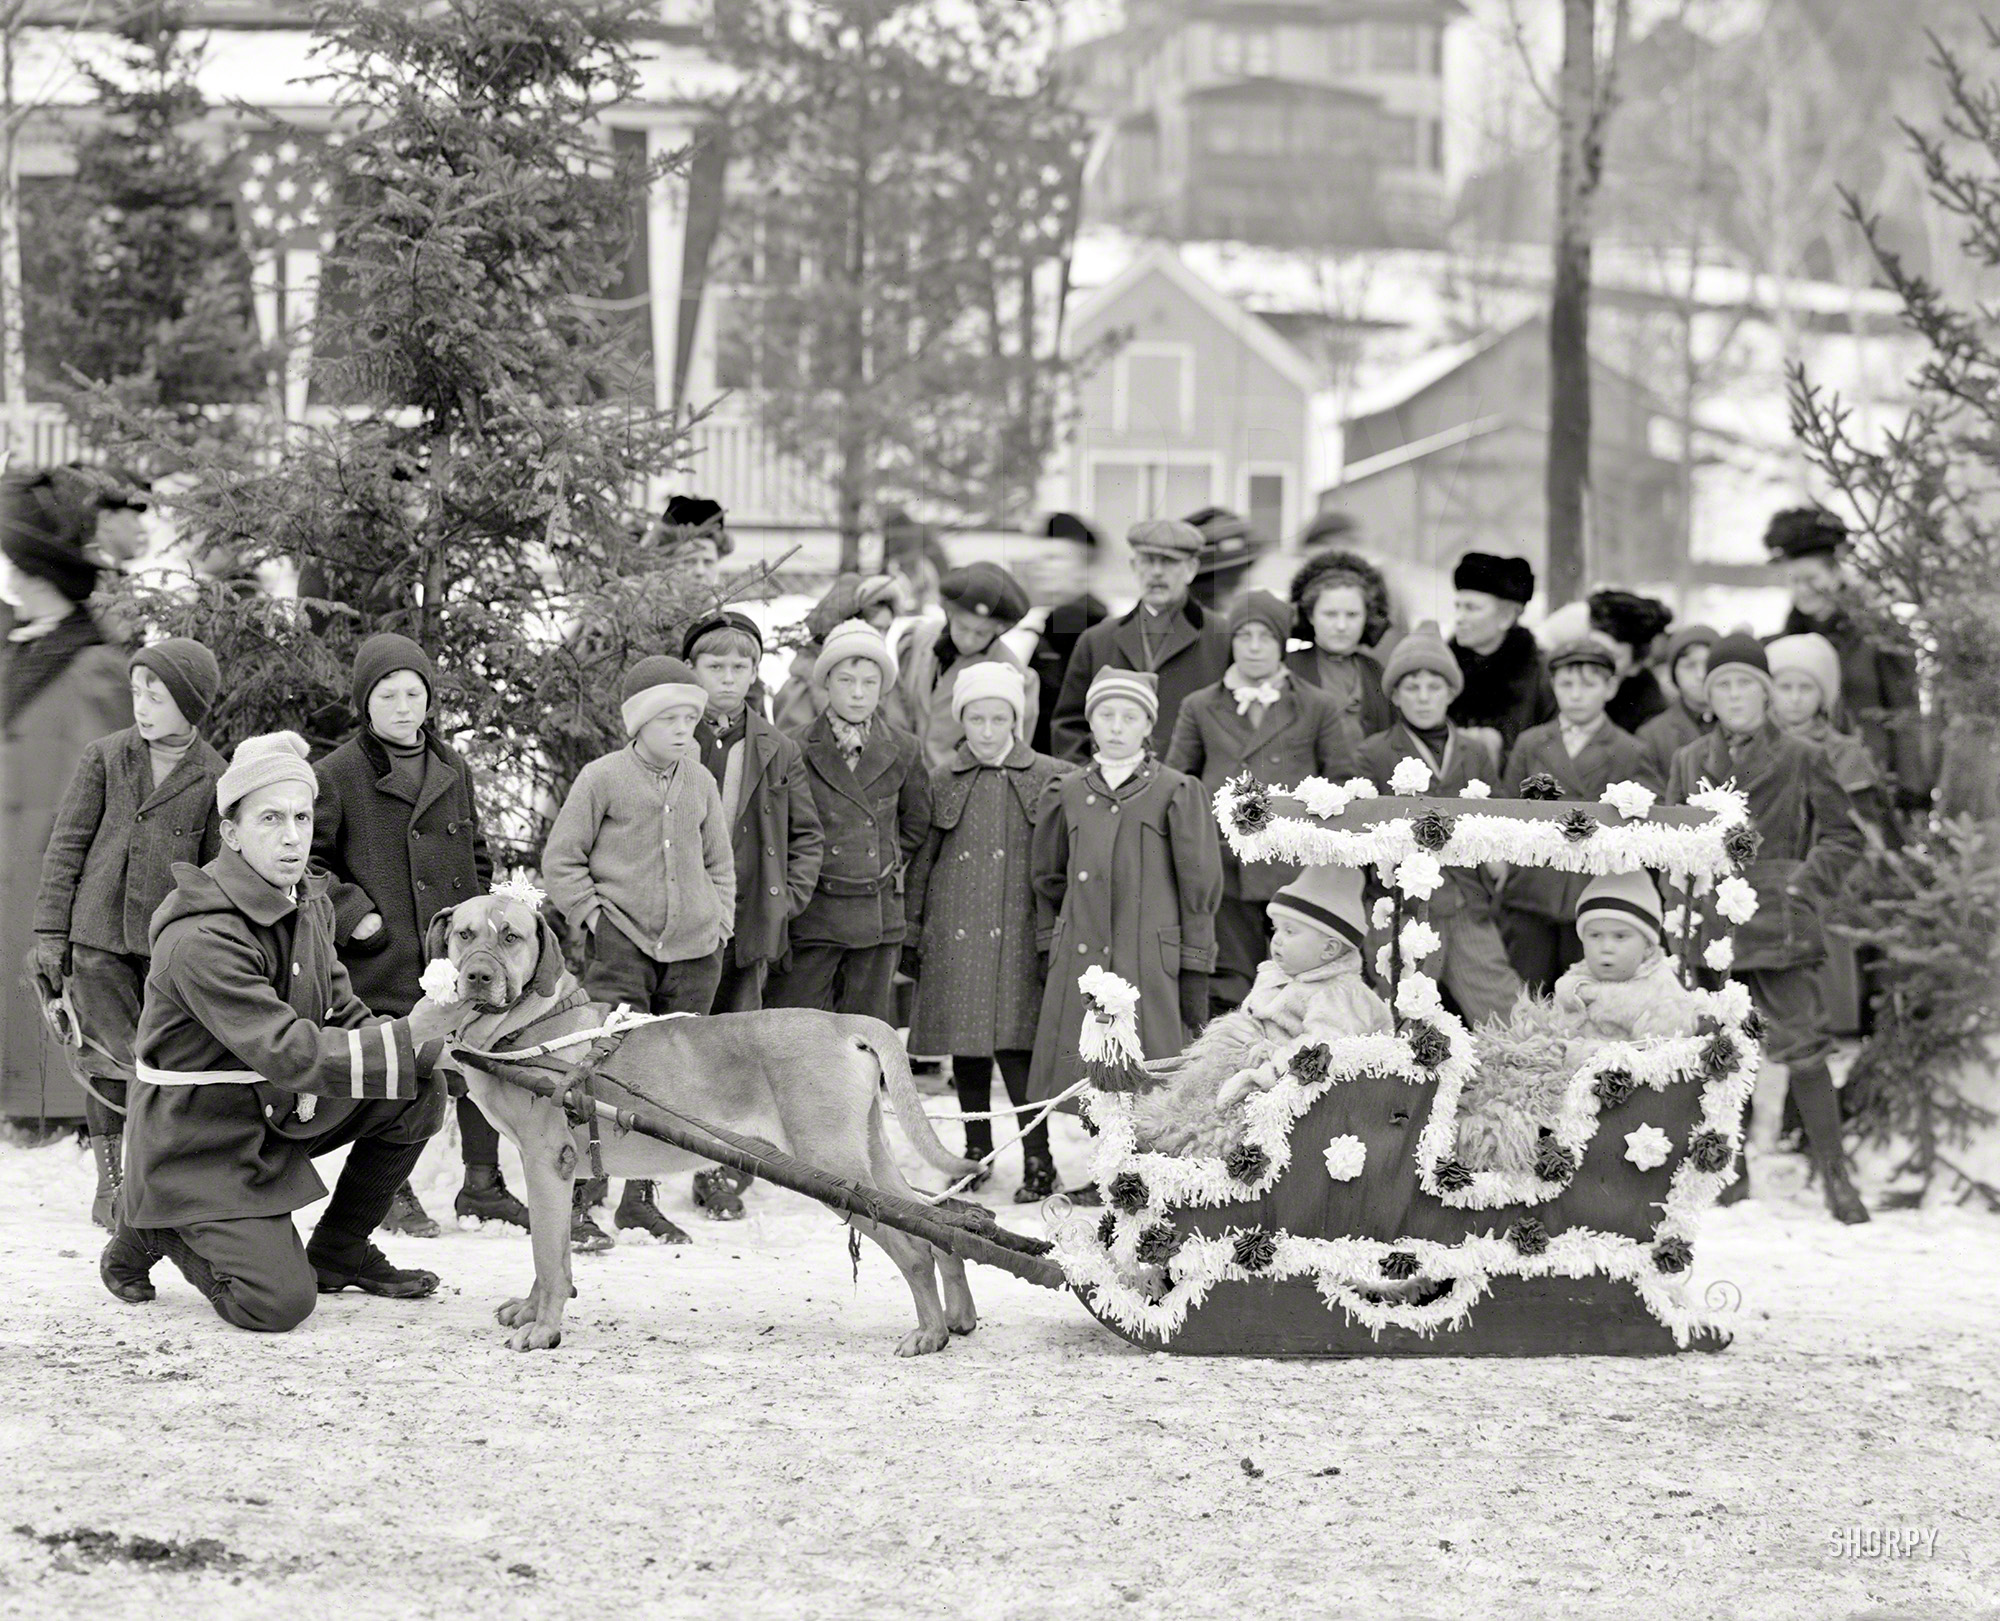 1909. "Midwinter carnival, children's parade with dog sled. Upper Saranac Lake, N.Y." 8x10 inch glass negative, Detroit Publishing Company. View full size.